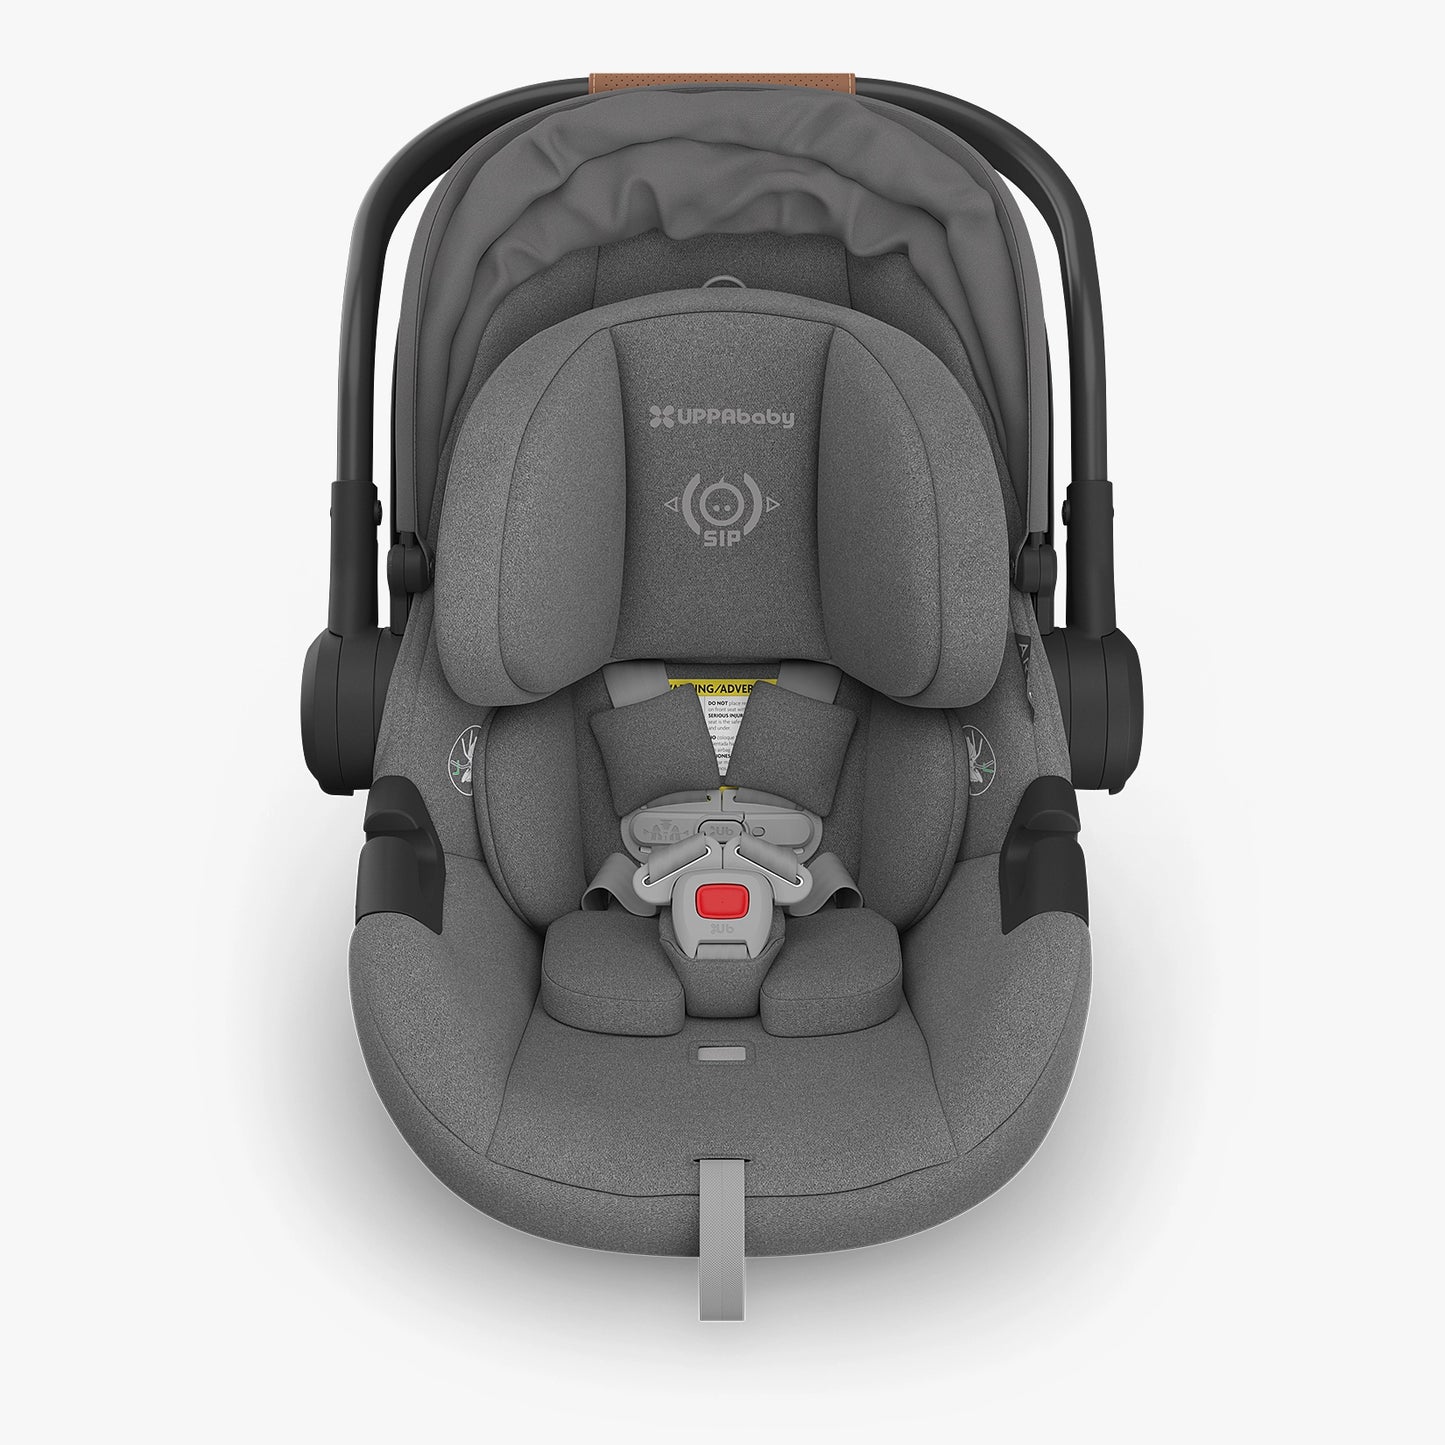 ARIA Infant Car Seat - GREYSON (BACKORDERED UNTIL JUNE)  - DROPSHIP ITEM - PLEASE ALLOW ONE WEEK FOR PROCESSING